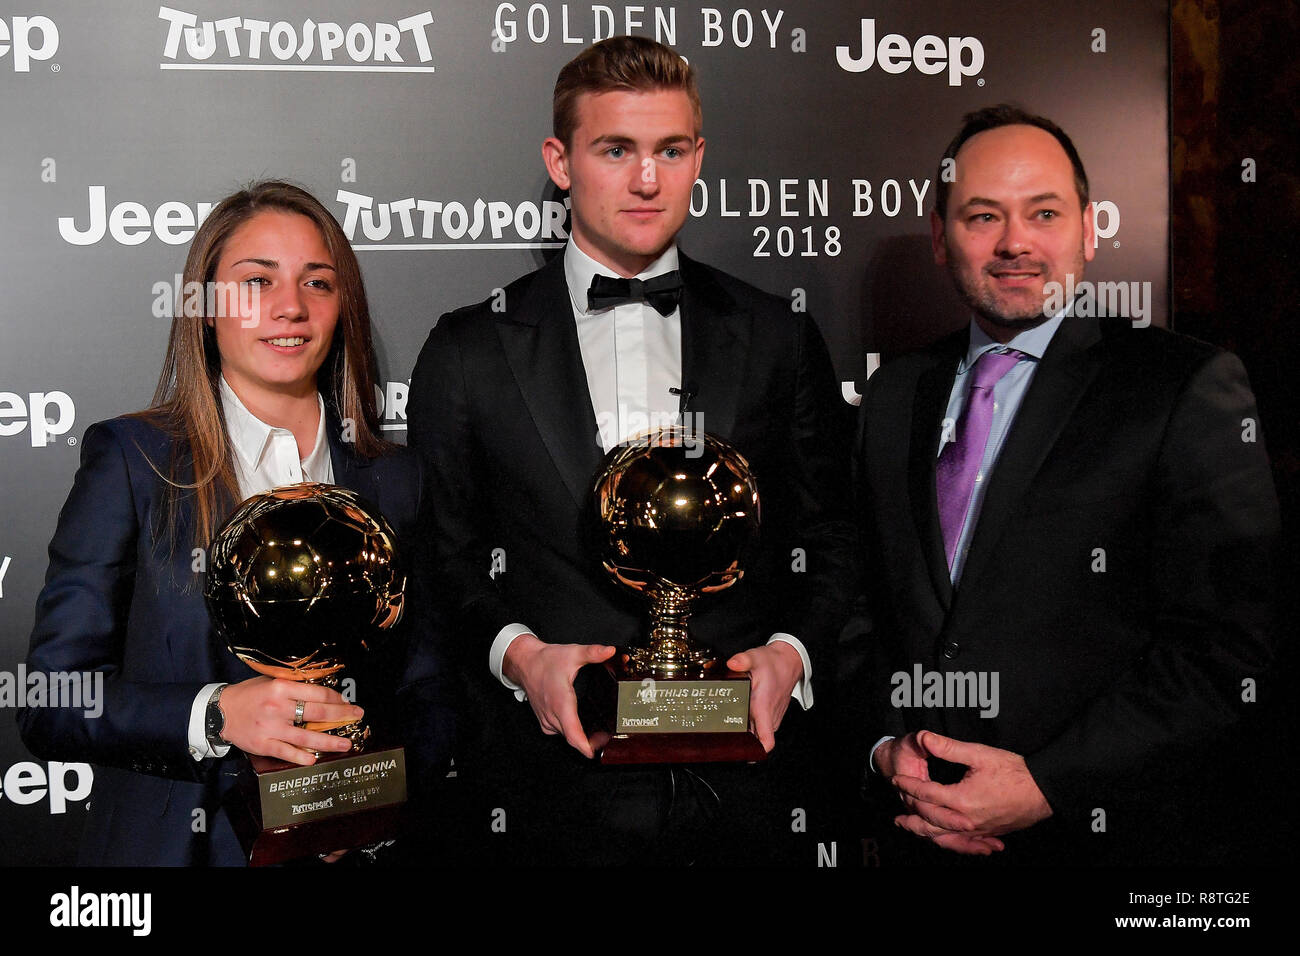 Turin Italy 17th December 18 Golden Boy Awards 18 The Award As The Best Under 21 In Europe By Tuttosport In The Pic Credit Lapresse Alamy Live News Stock Photo Alamy